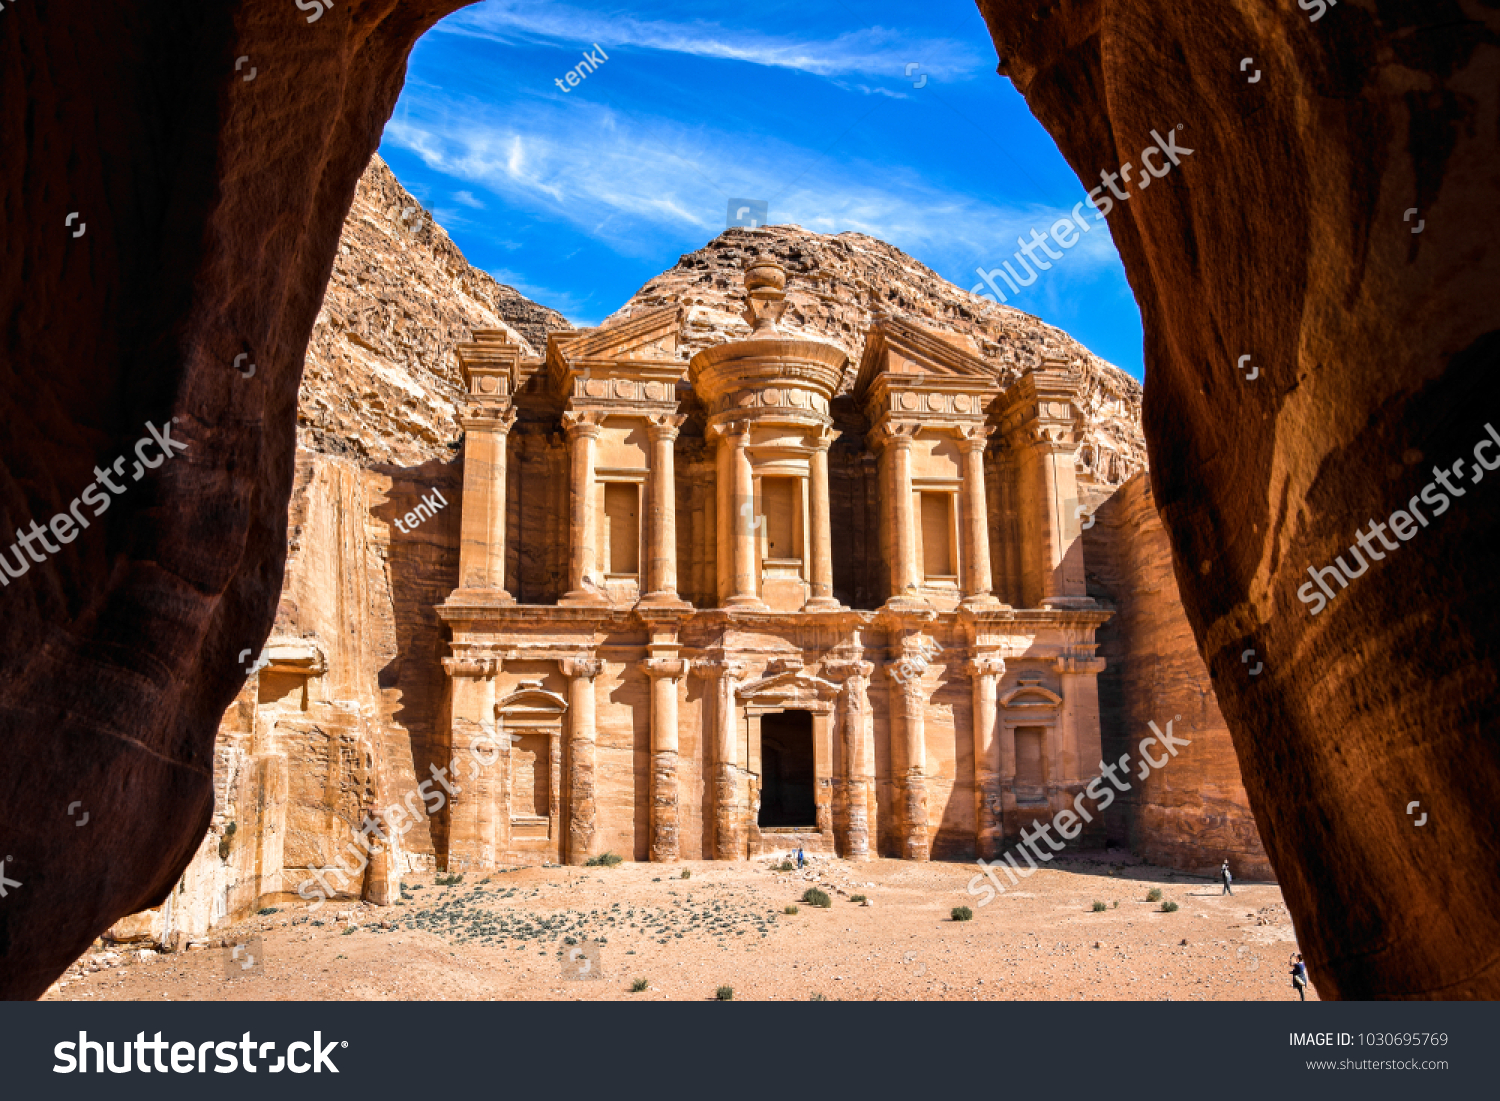 Stunning view of the Ad Deir - Monastery in the ancient city of Petra, Jordan: Incredible UNESCO World Heritage Site. #1030695769